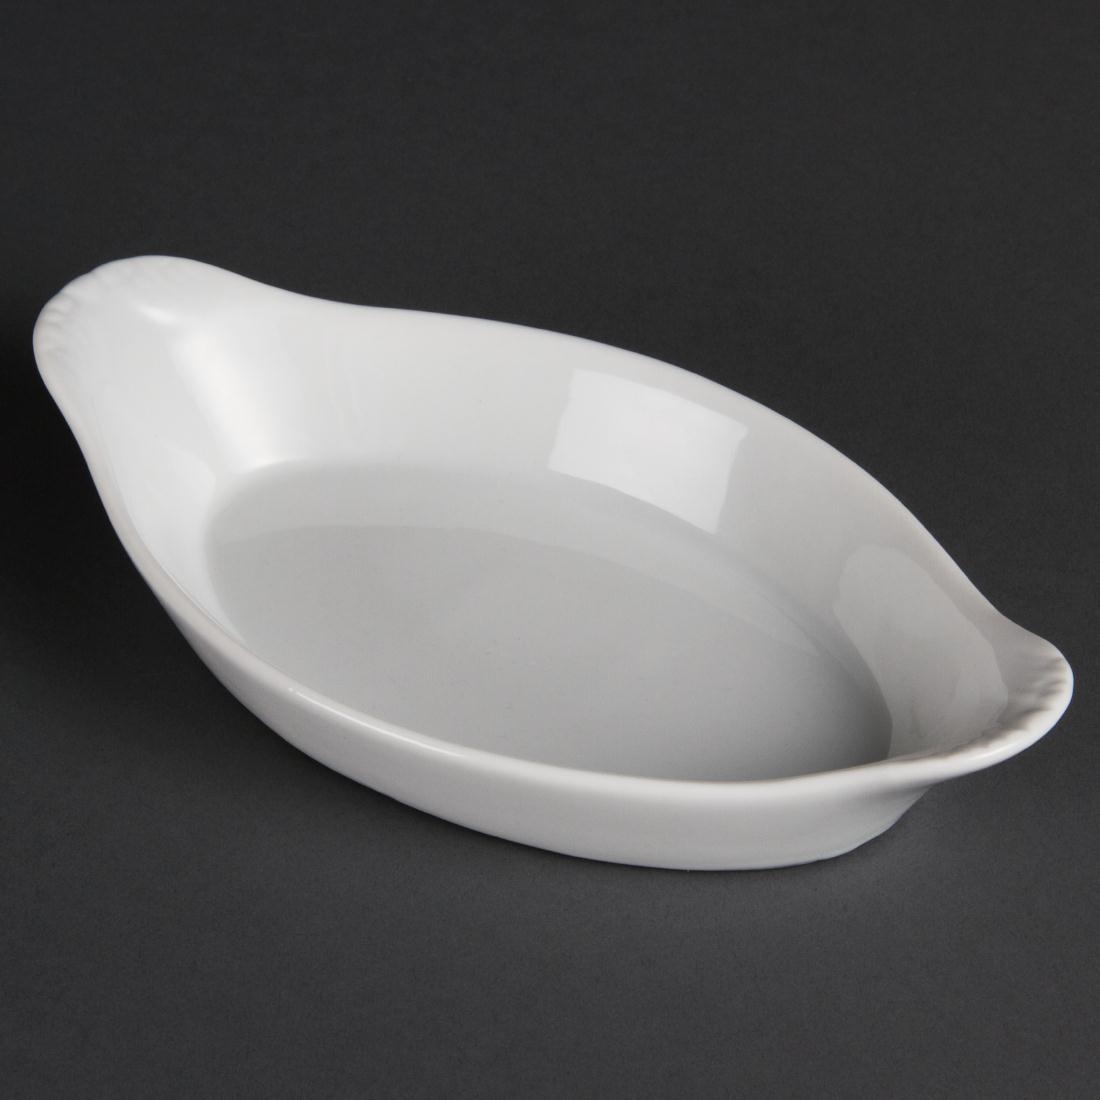 Olympia Whiteware Oval Eared Dishes 204mm